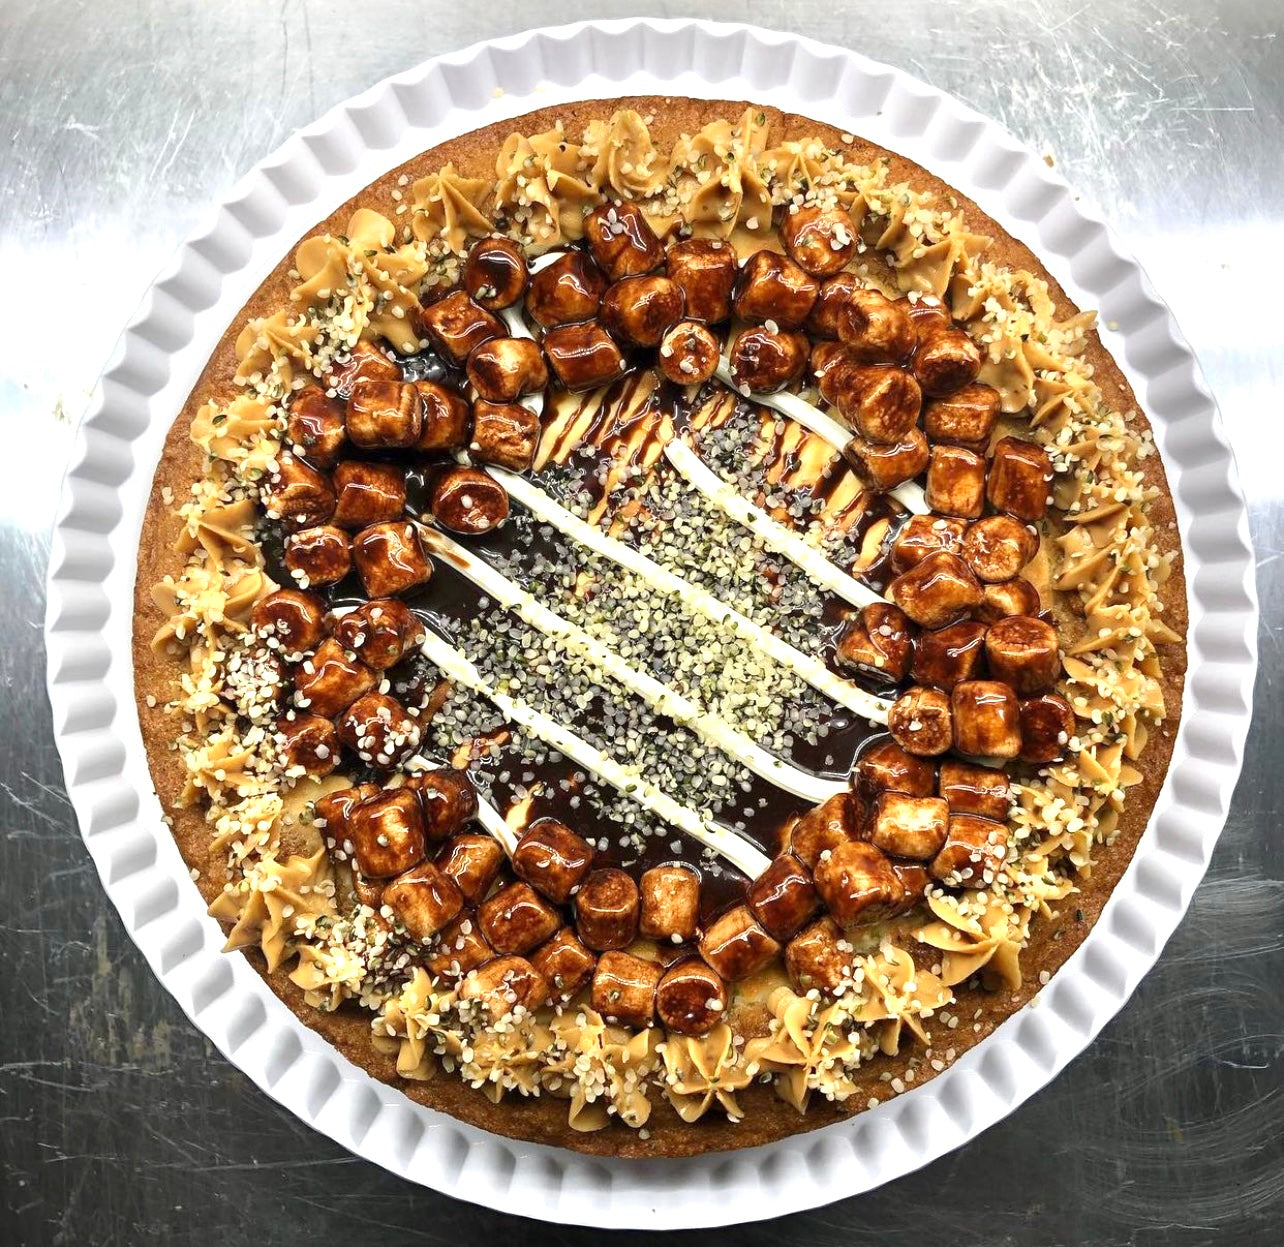 Peanut butter S’mores Cheesecake